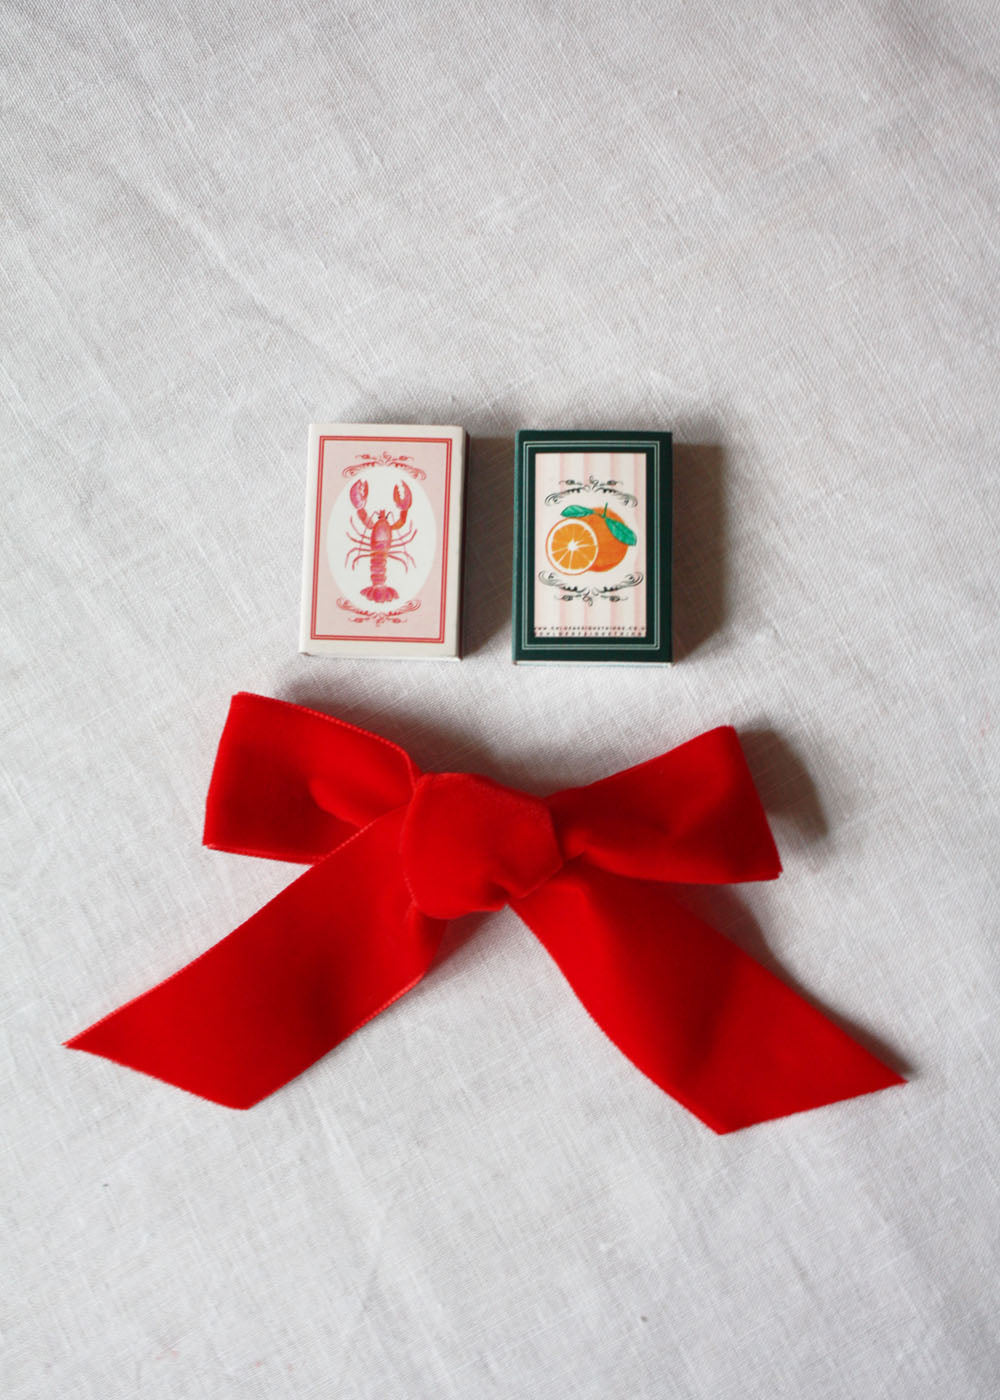 Cocolulu x Chloe Designs Things Lobster candle and match box set